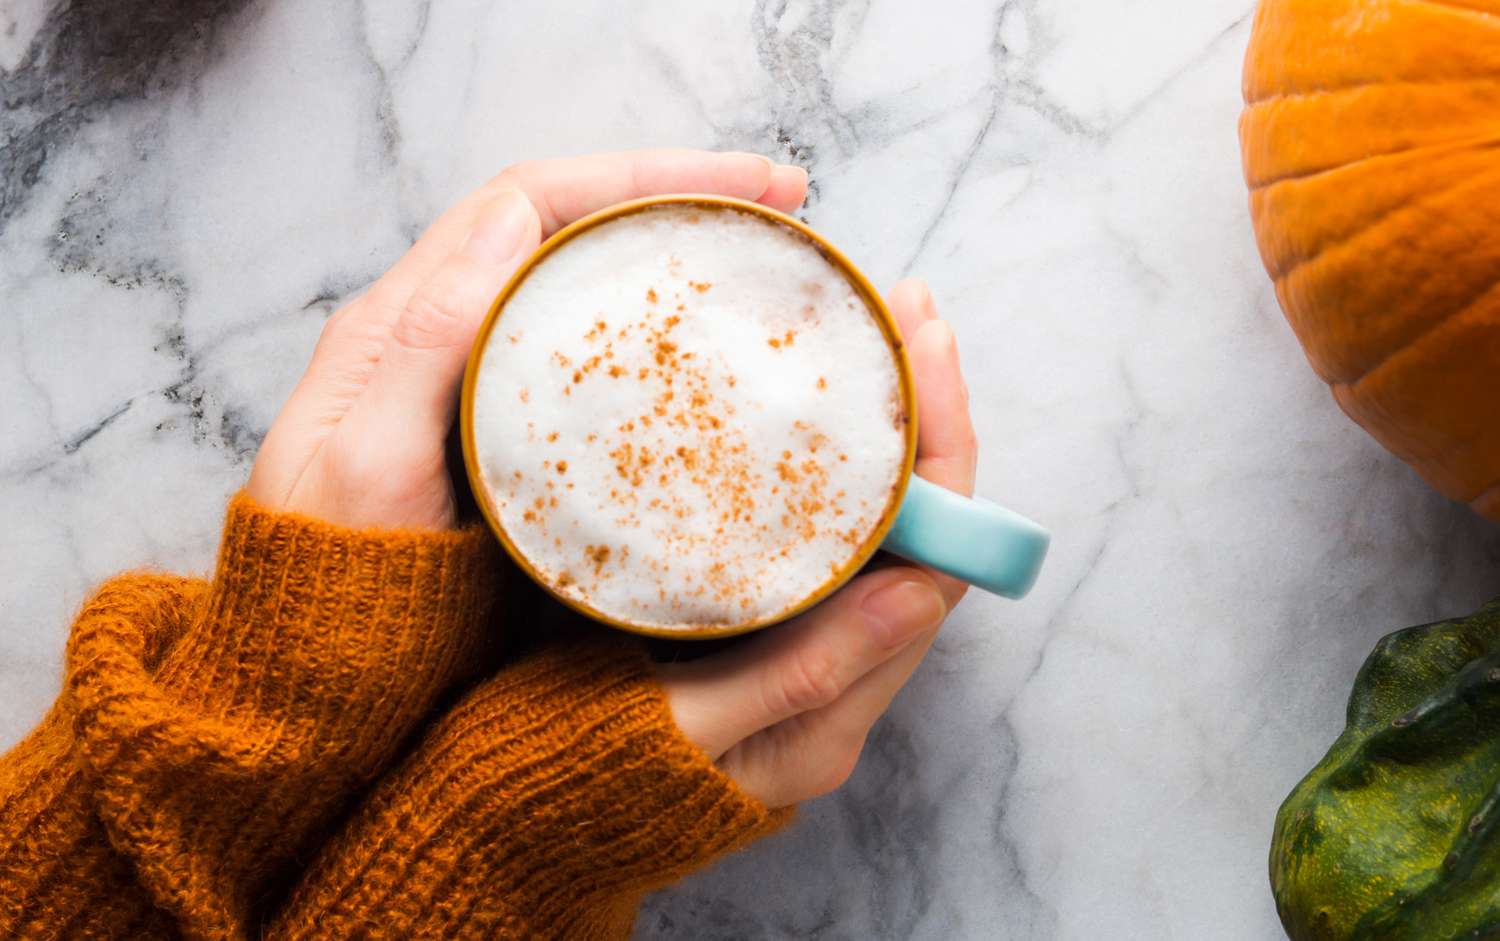 hands holding a pumpkin latte on a marble surface with a pumpkin nearby